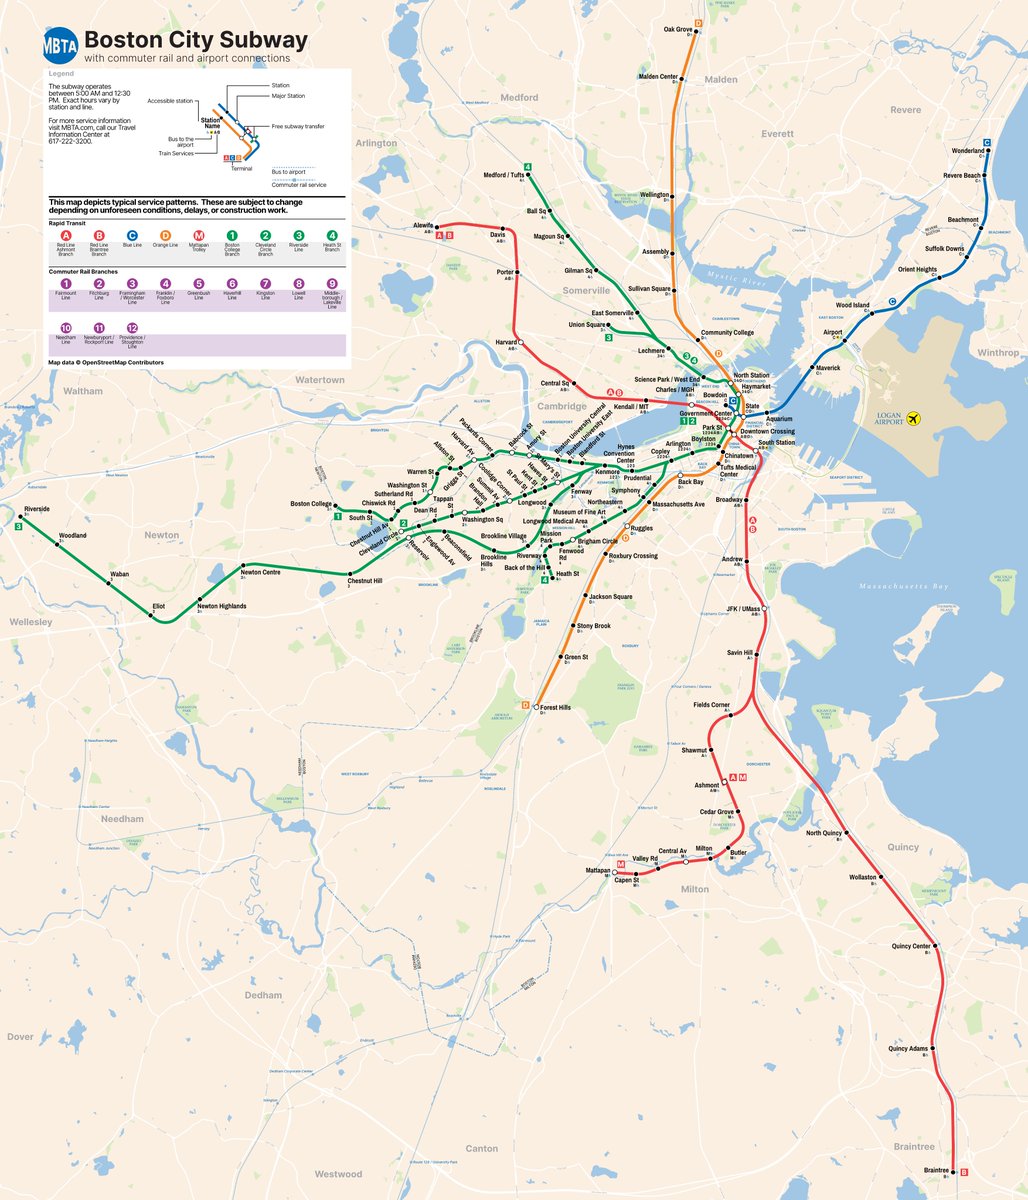 The MBTA map, in the style of the 2013 Hertz / Tauranac subway map